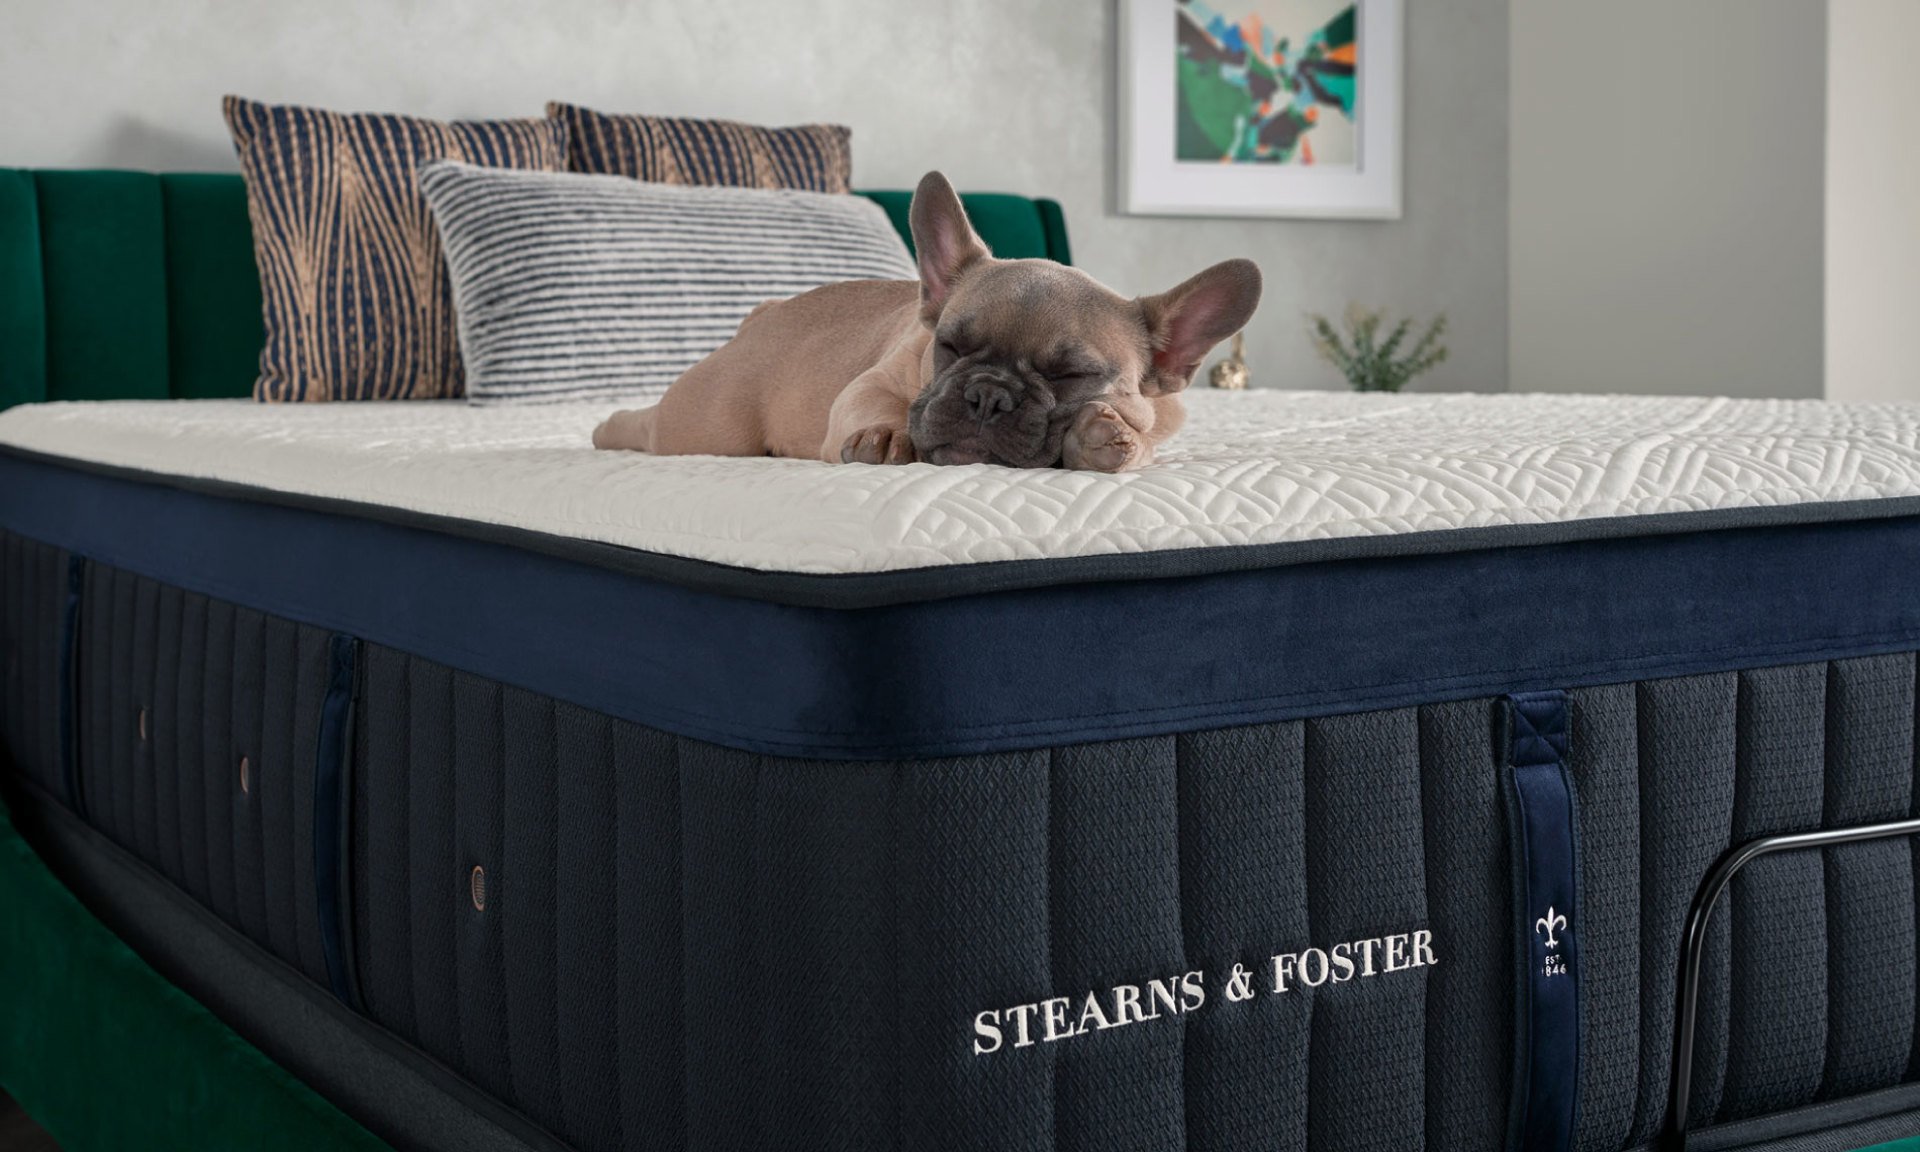 Stearns and Foster Mattresses are designed for comfort to helping you sleep soundly.